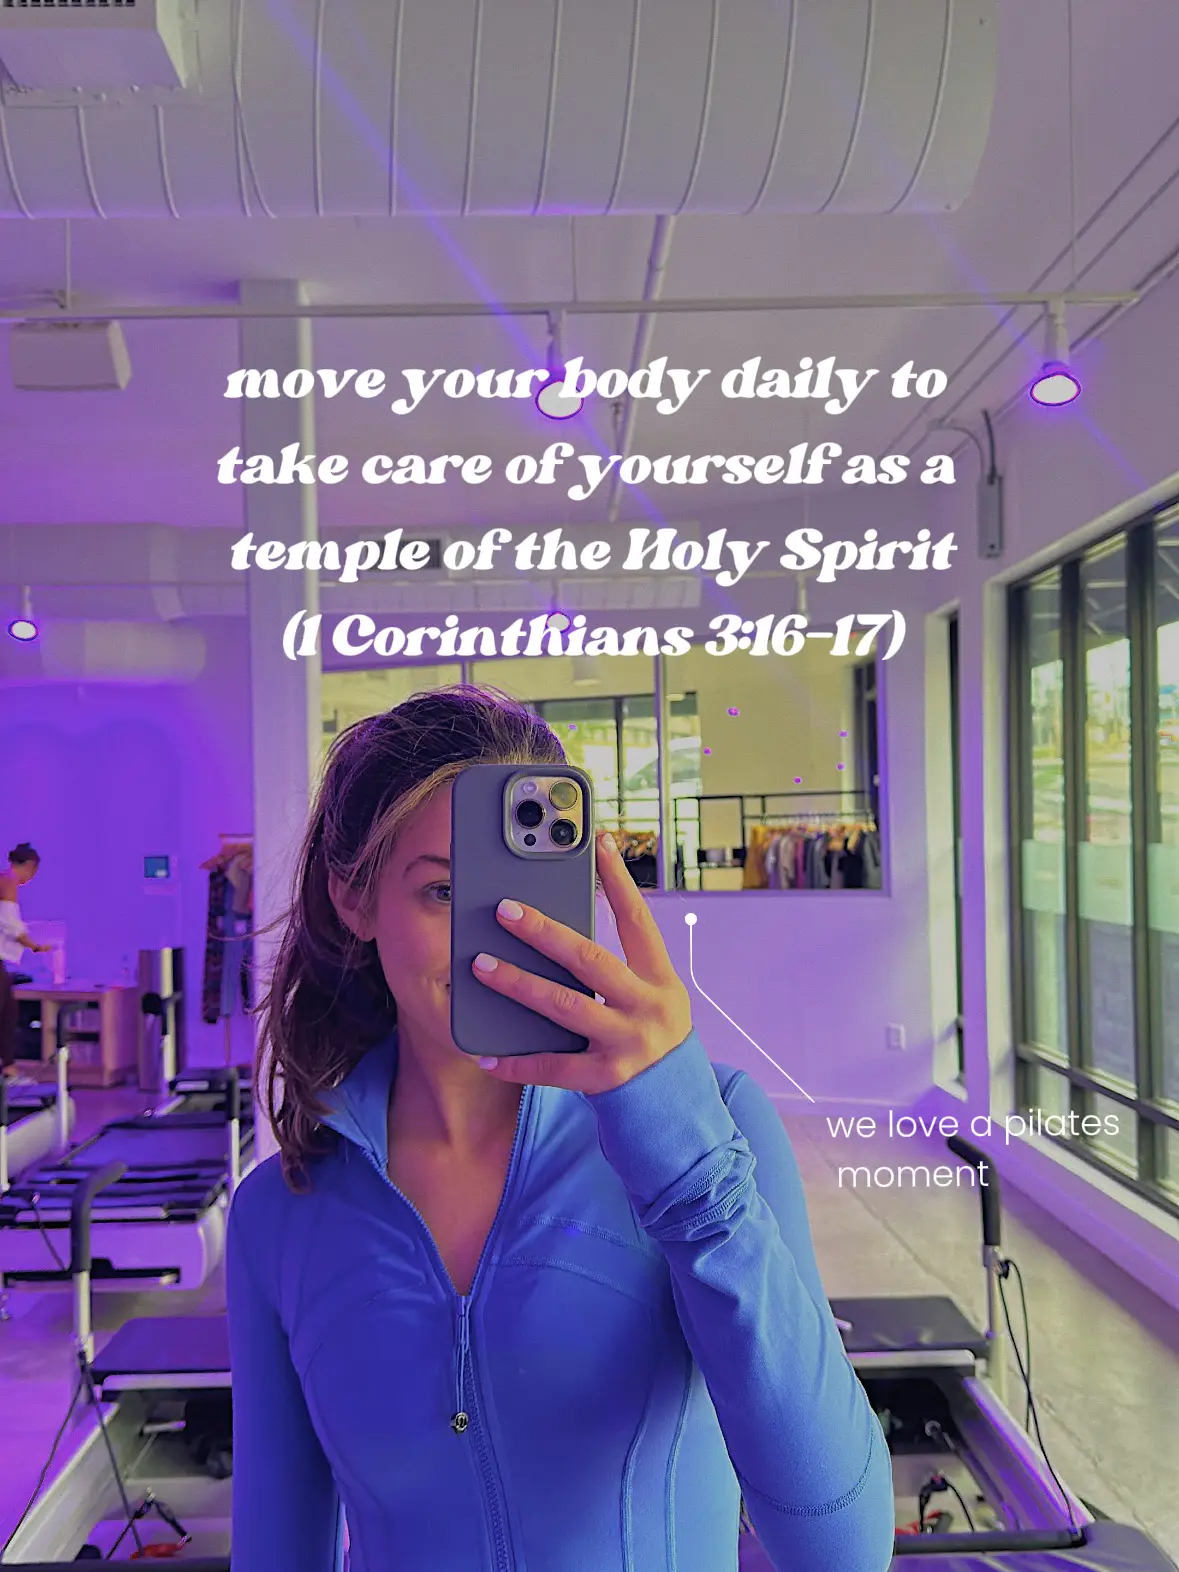  A woman in a blue shirt is taking a selfie in a gym.